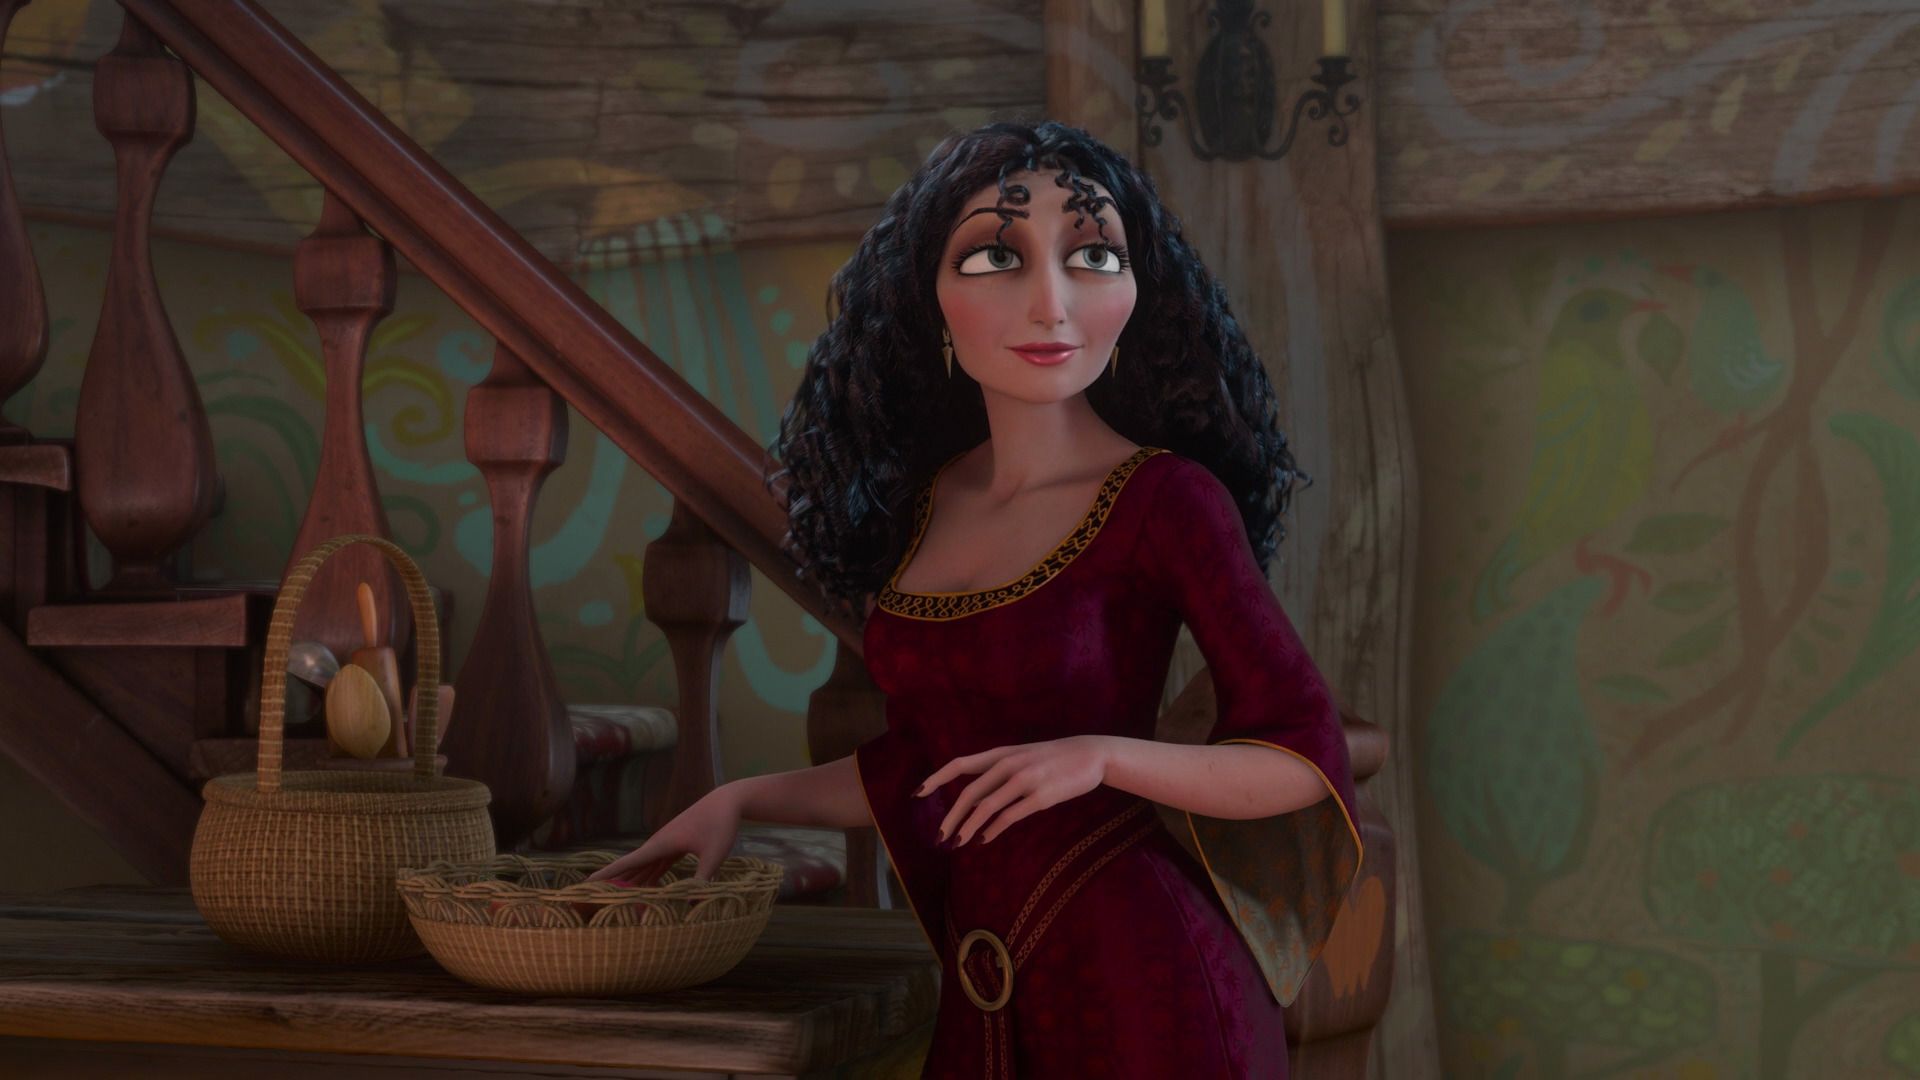 Mother Gothel from Disney's Tangled